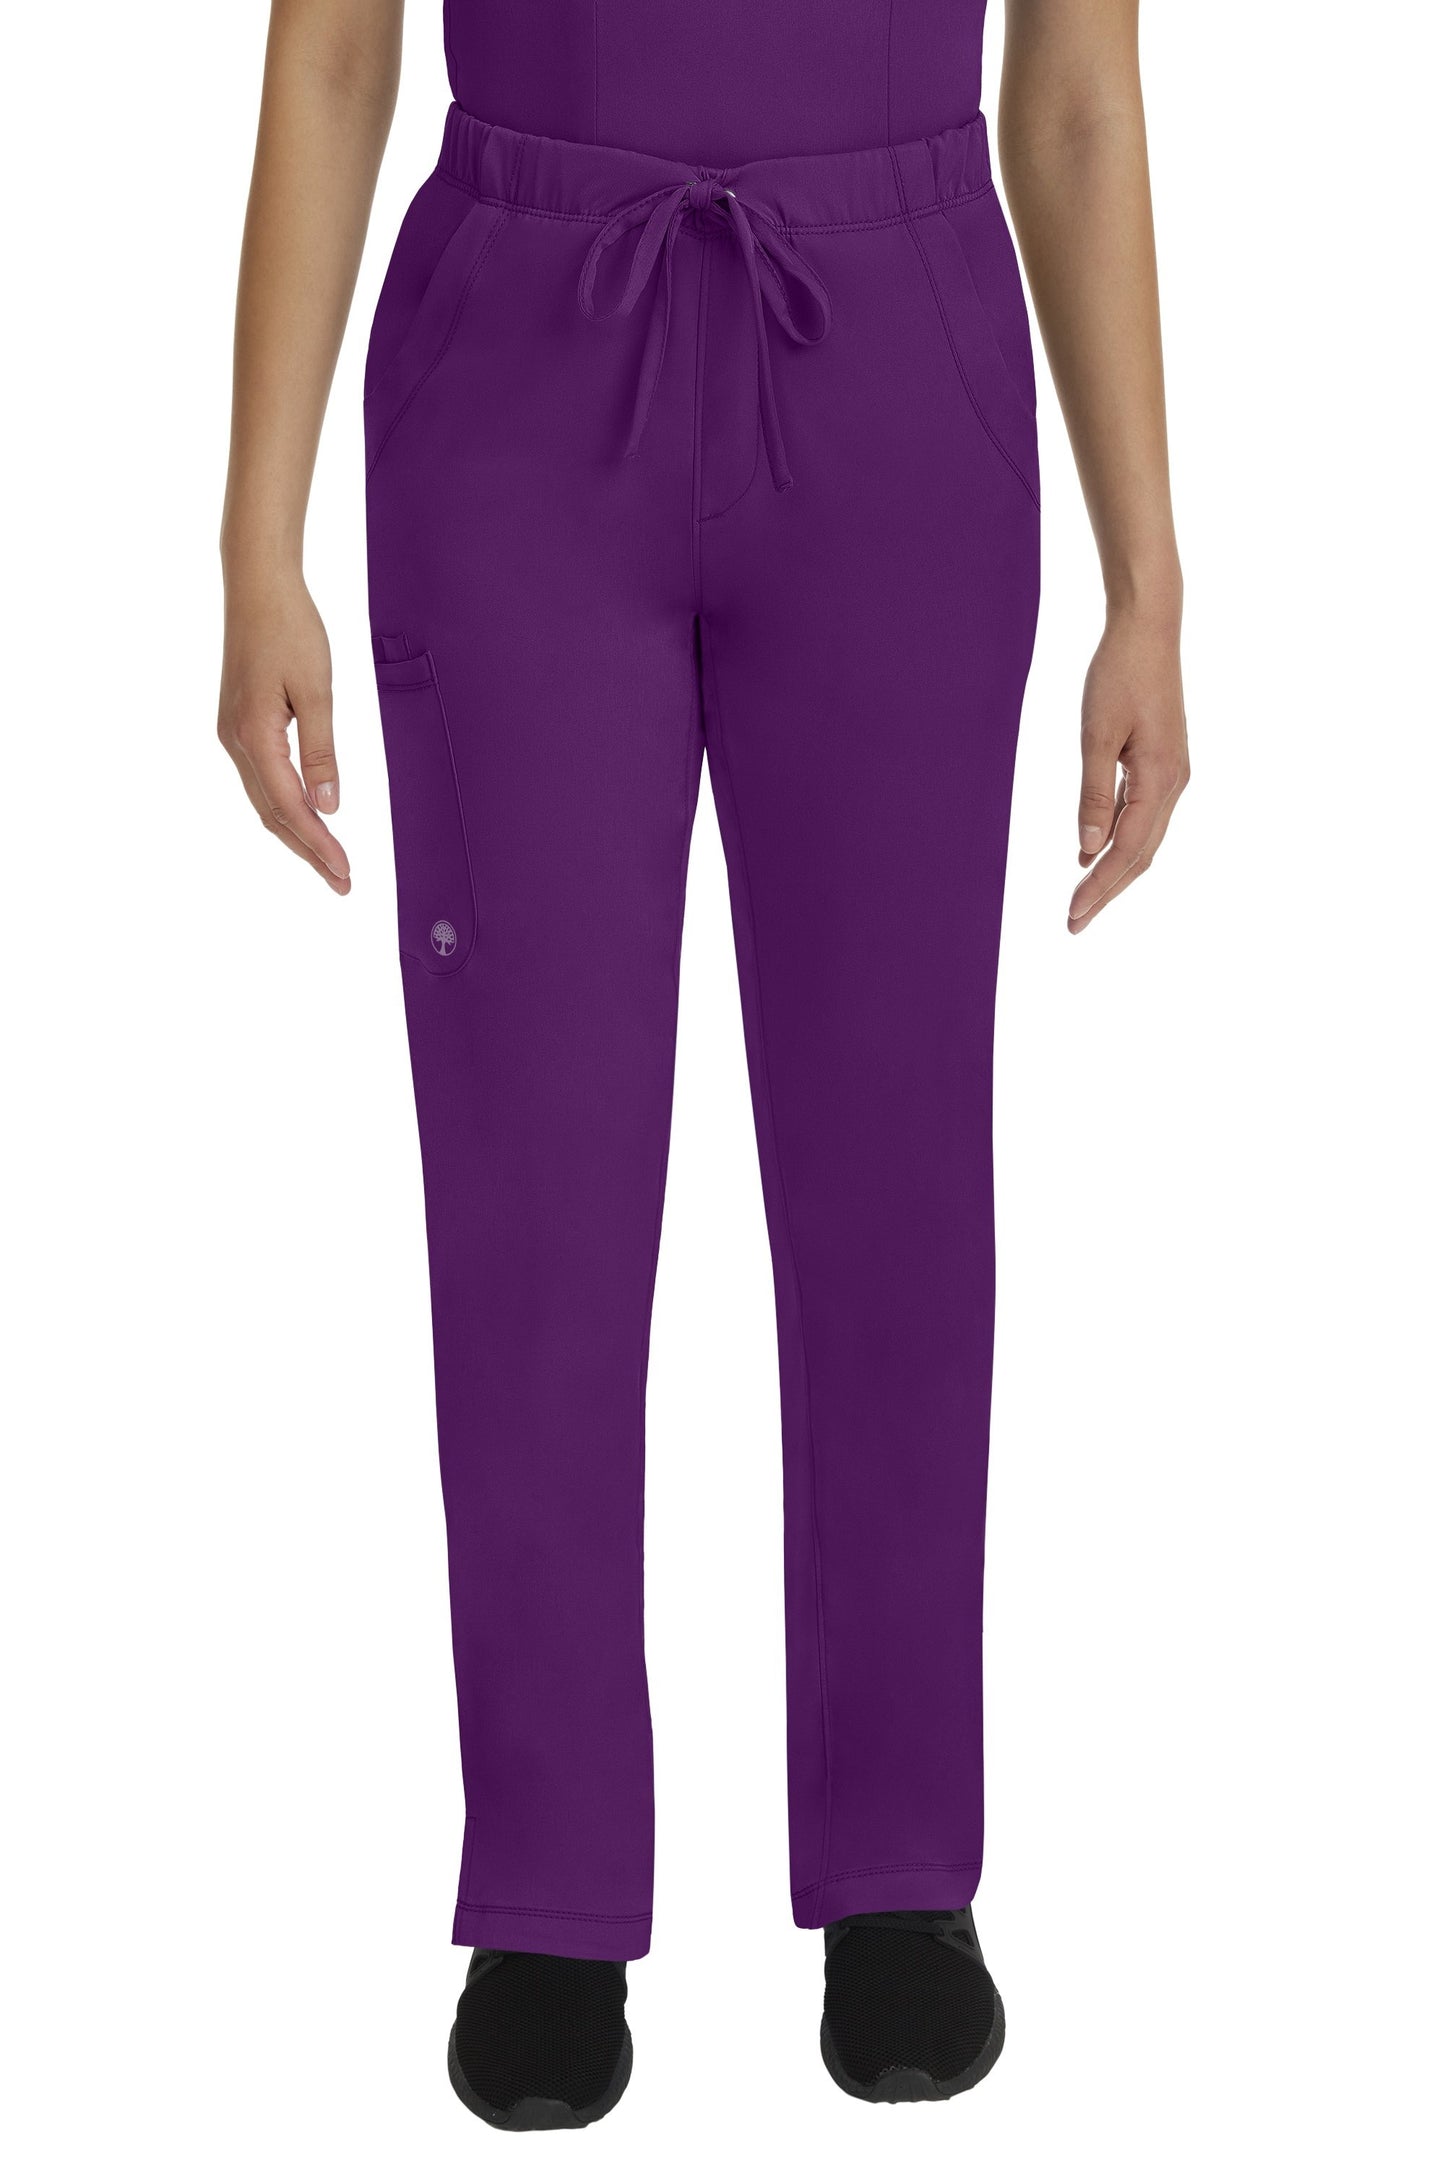 Healing Hands Scrubs HH Works Rebecca Petite Scrub Pant in Eggplant at Parker's Clothing and Shoes.